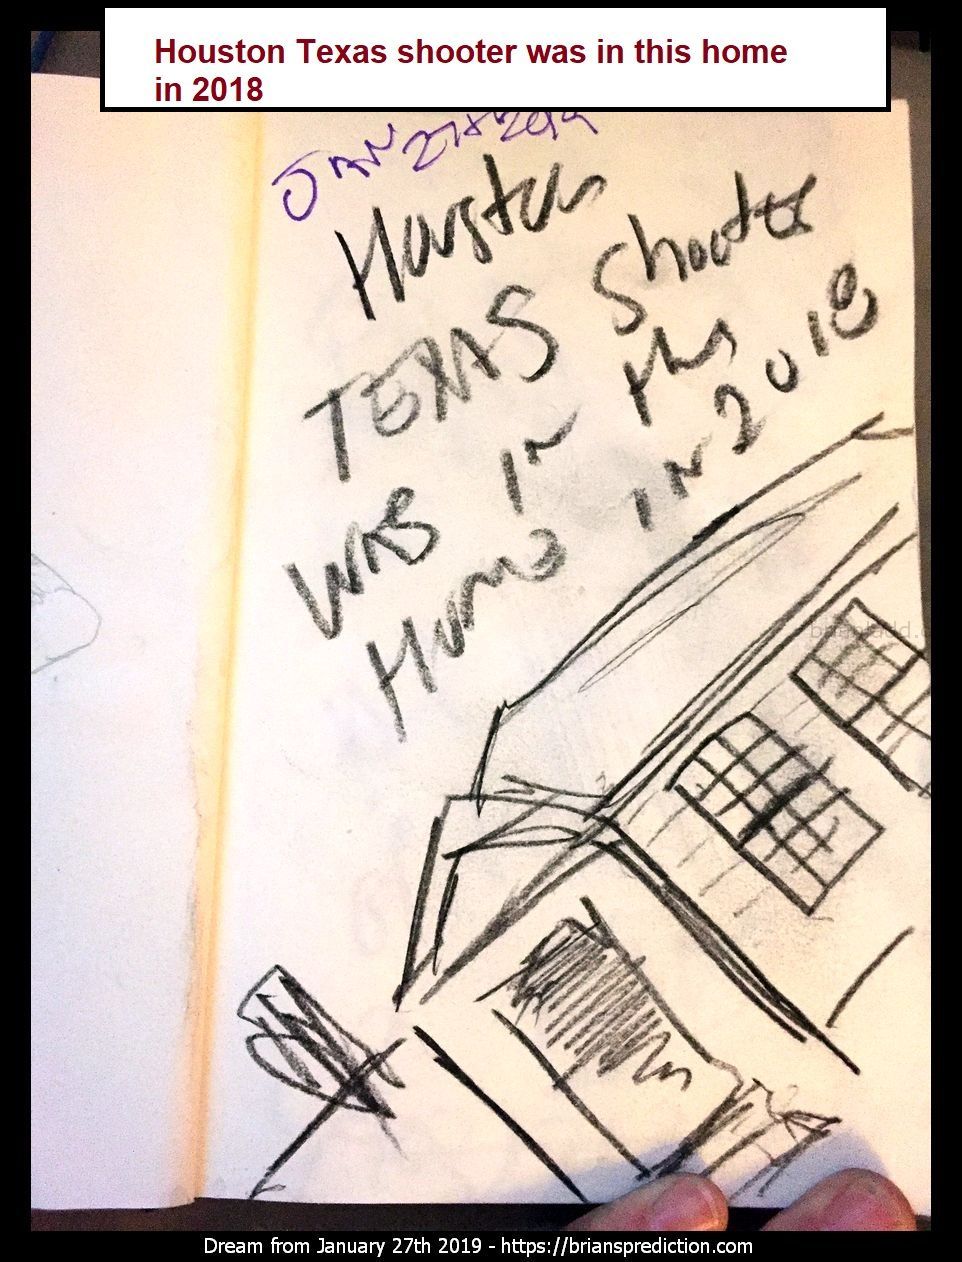 11625 27 January 2019 1 - Houston Texas Shooter Was In This Home In 2018  Dream Number 11625 27 January 2019 1 Psychic P...
Houston Texas Shooter Was In This Home In 2018  Dream Number 11625 27 January 2019 1 Psychic Prediction
